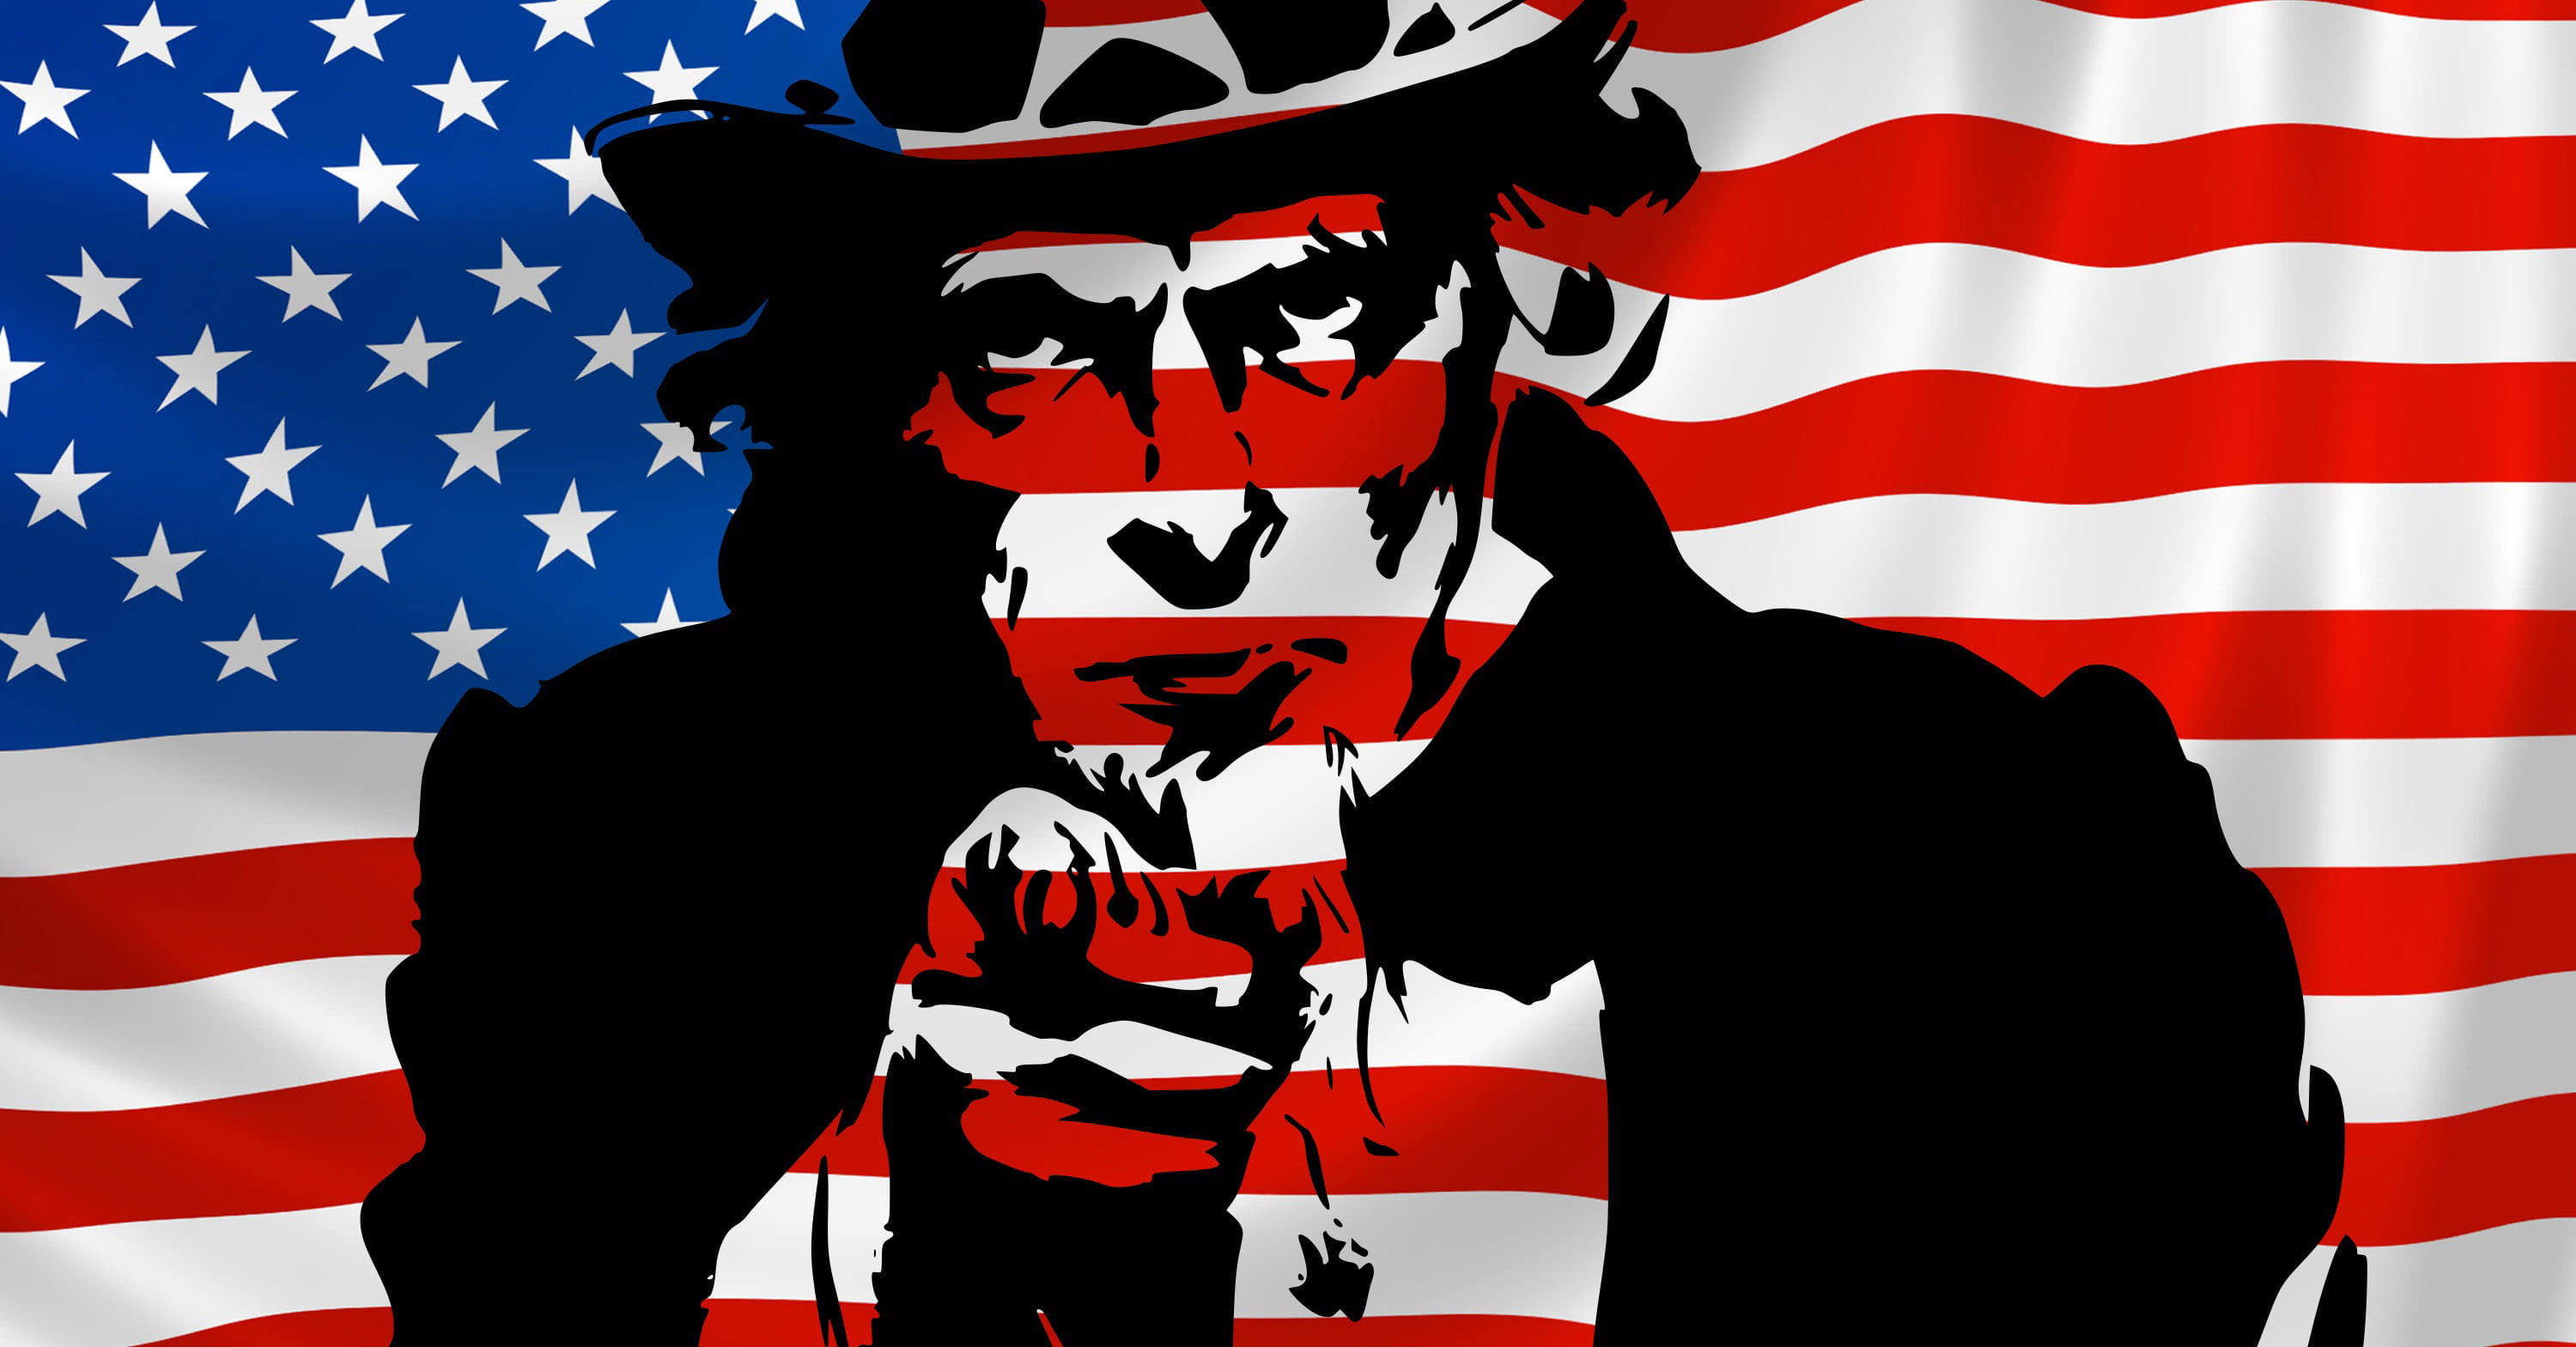 Wallpaper Uncle Sam In Front Of American Flag, 4th Of July, 4th Of July, Holidays